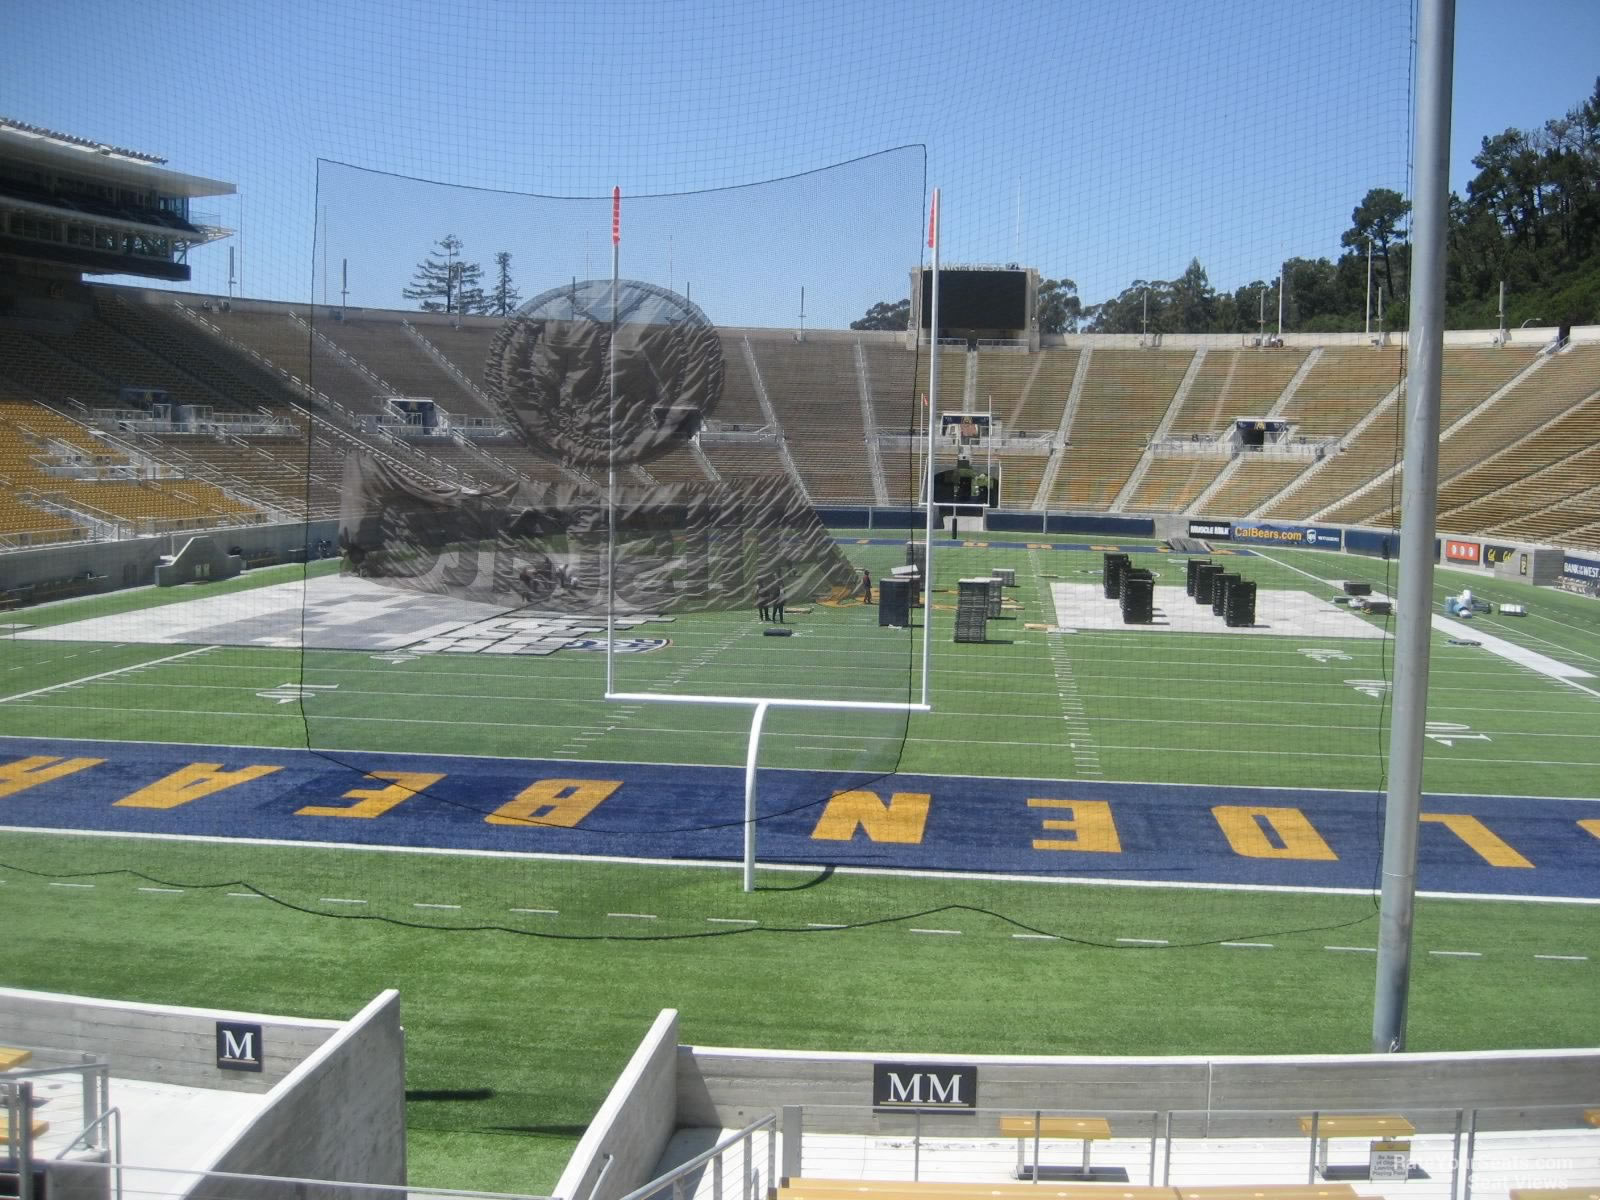 section mm, row 22 seat view  - memorial stadium (cal)